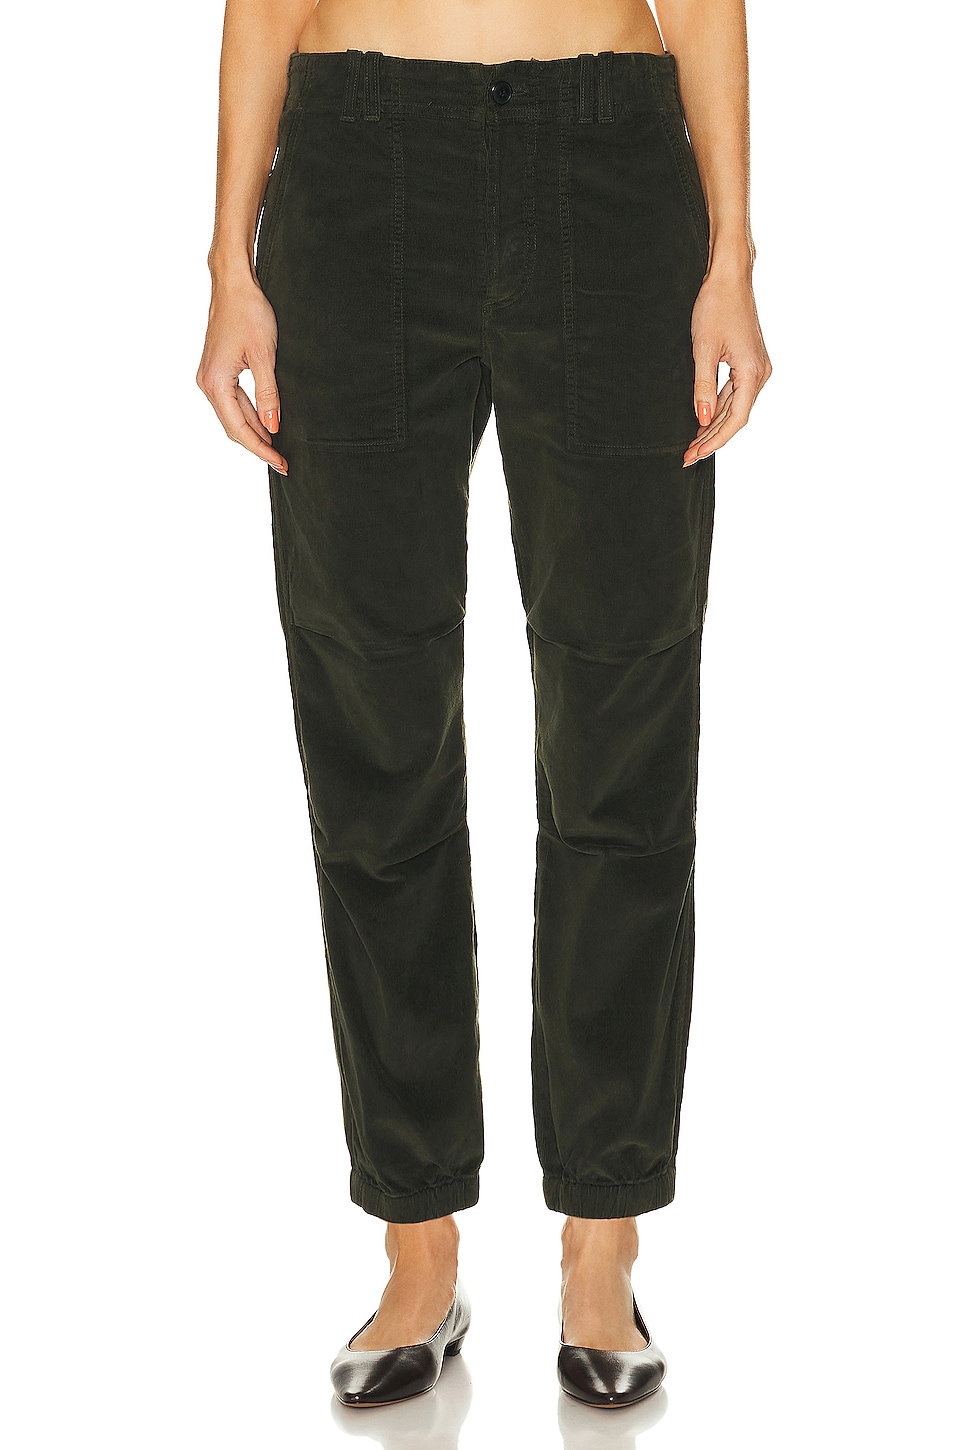 Image 1 of Citizens of Humanity Agni Utility Pant in Seaweed Corduroy